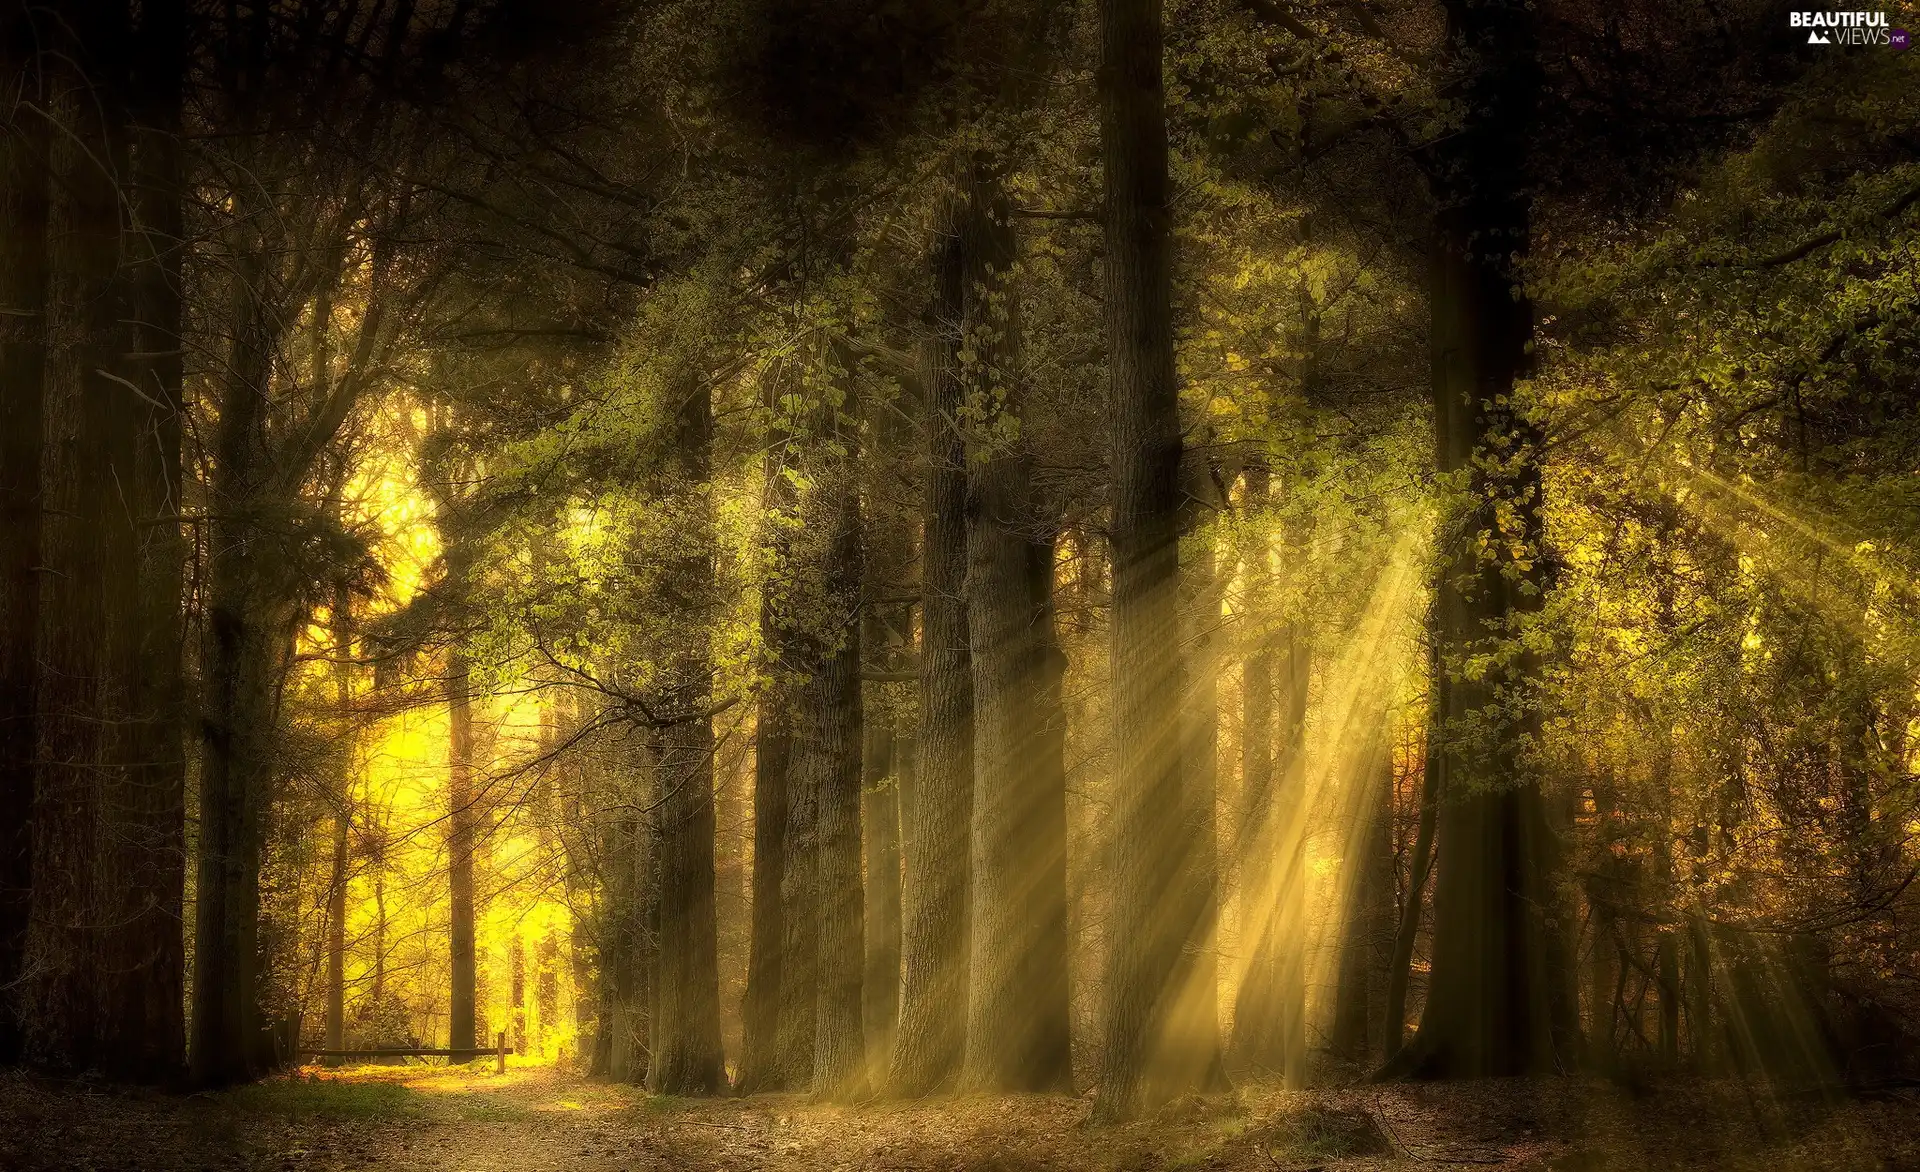 viewes, light breaking through sky, forest, trees, Green